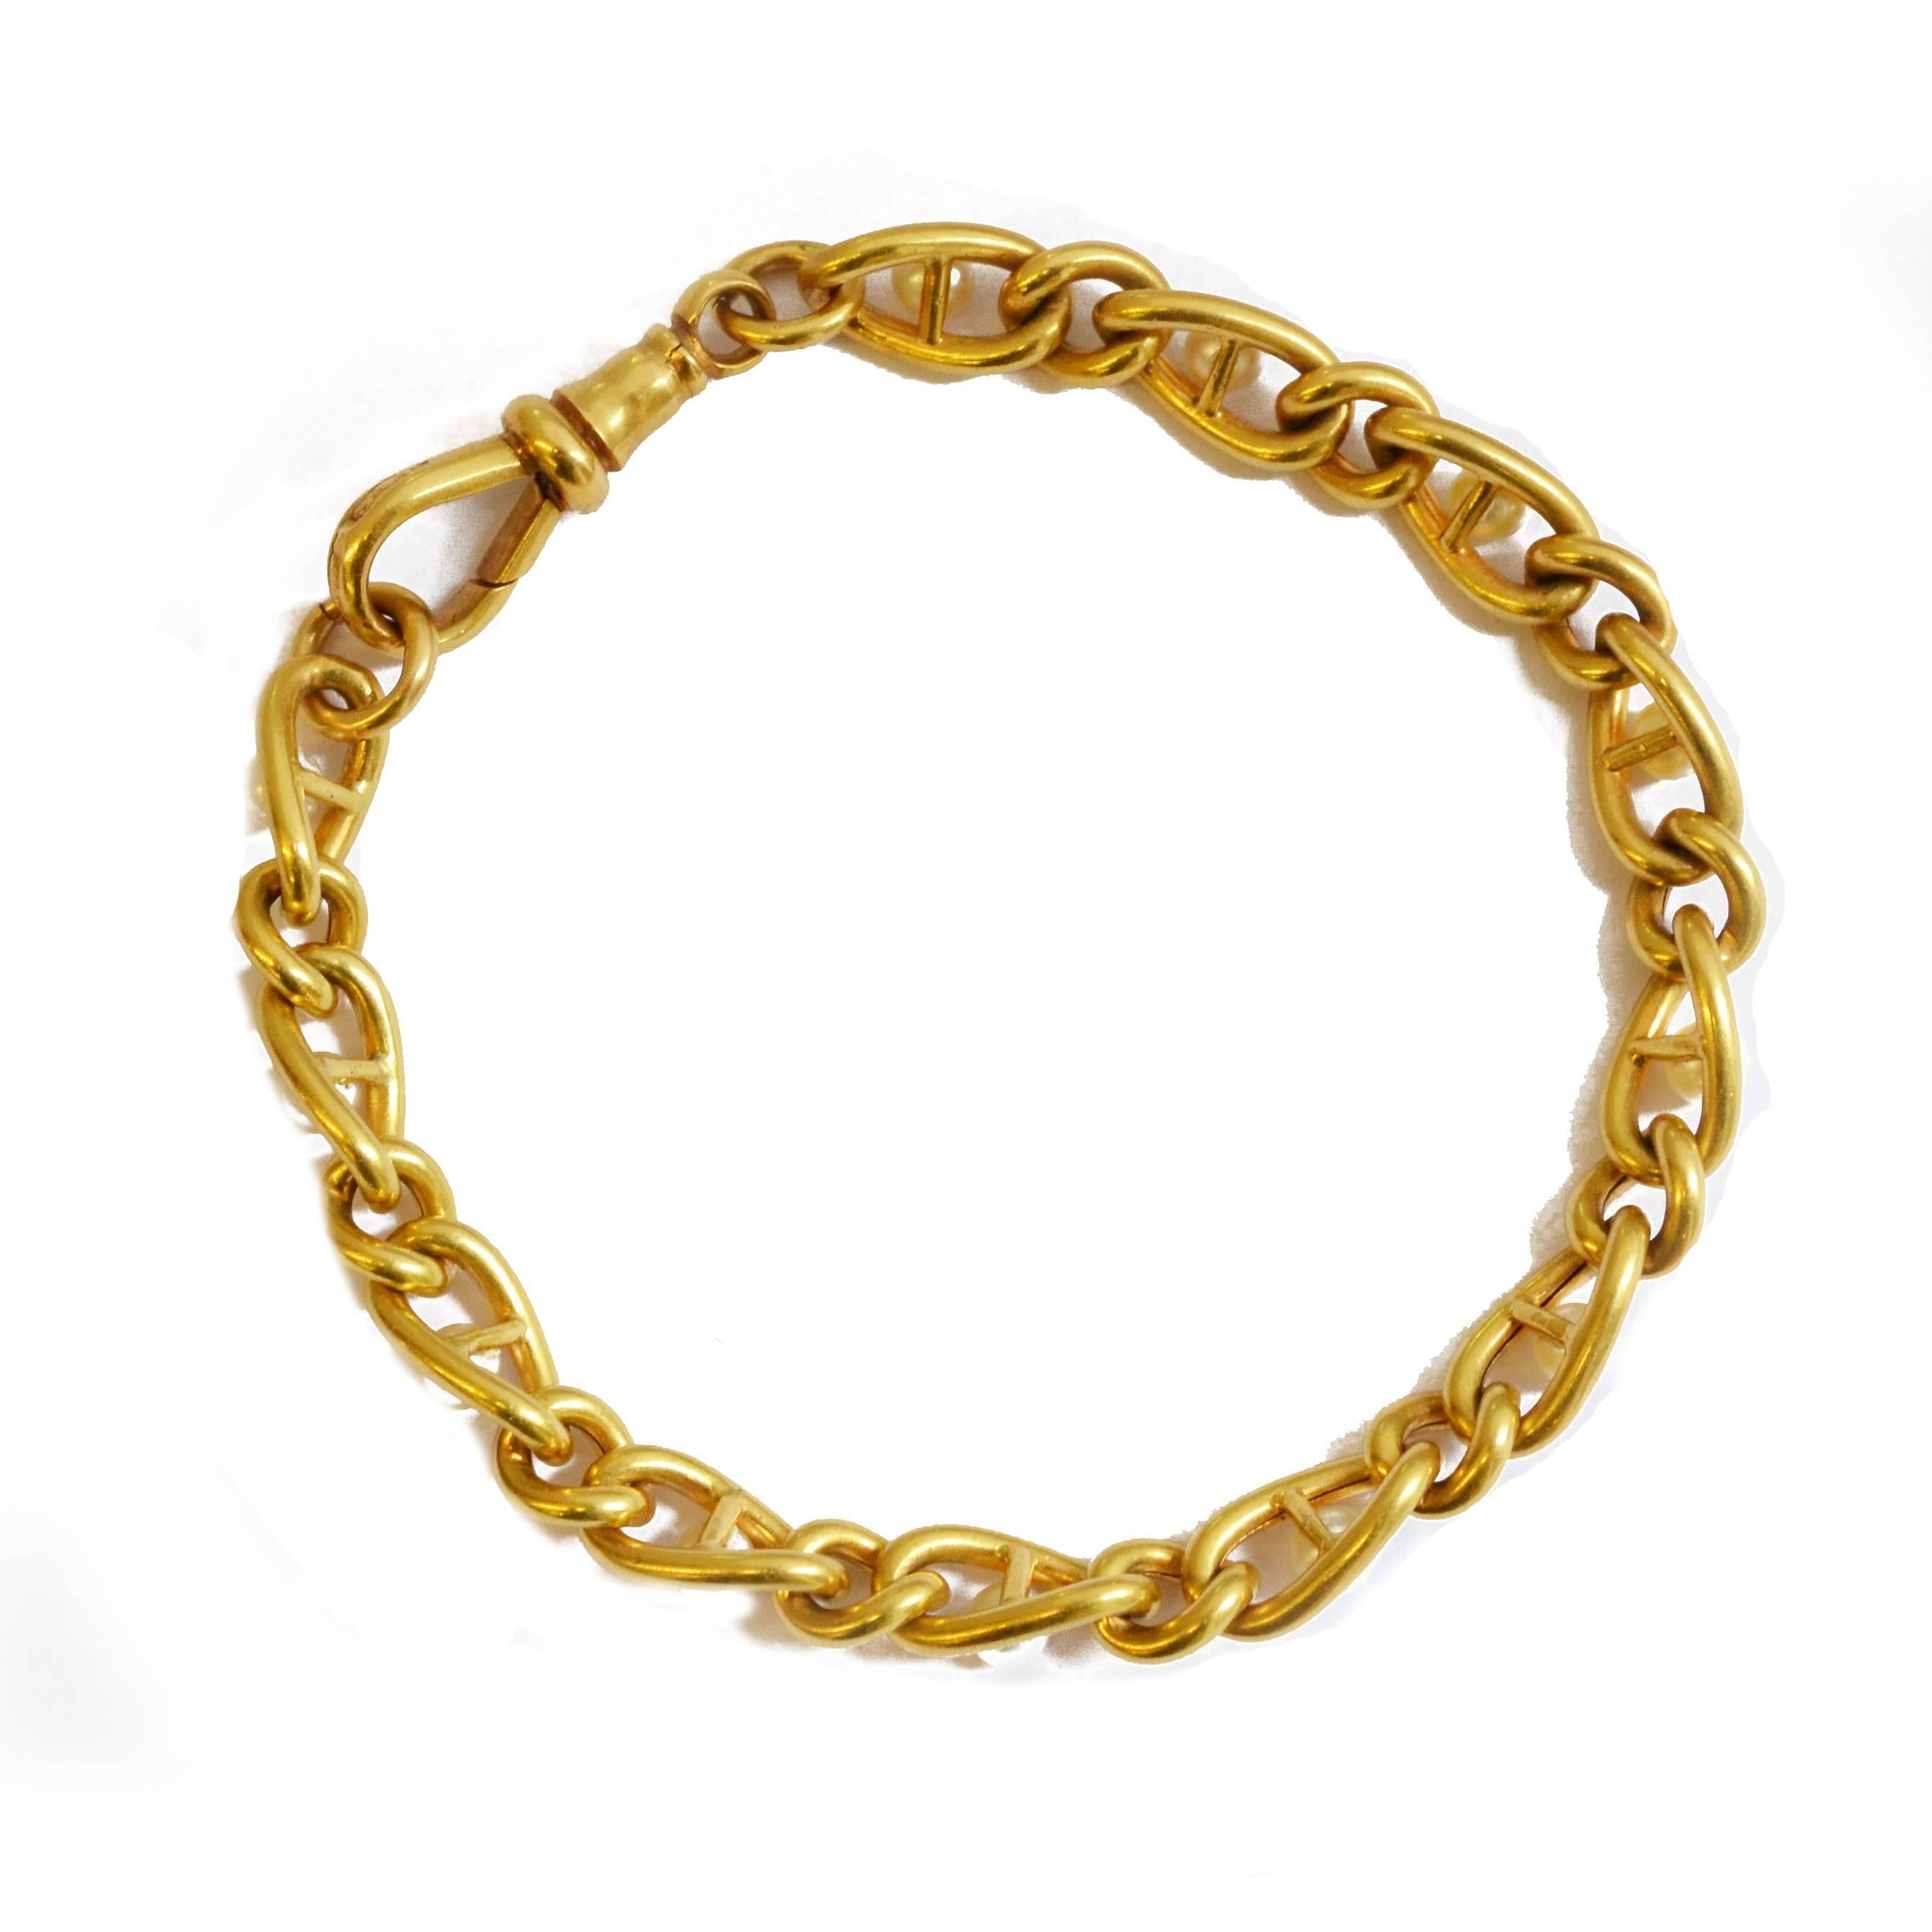 A Victorian 18ct yellow gold curb link bracelet, set with natural Oriental pearls. English, circa 1890.